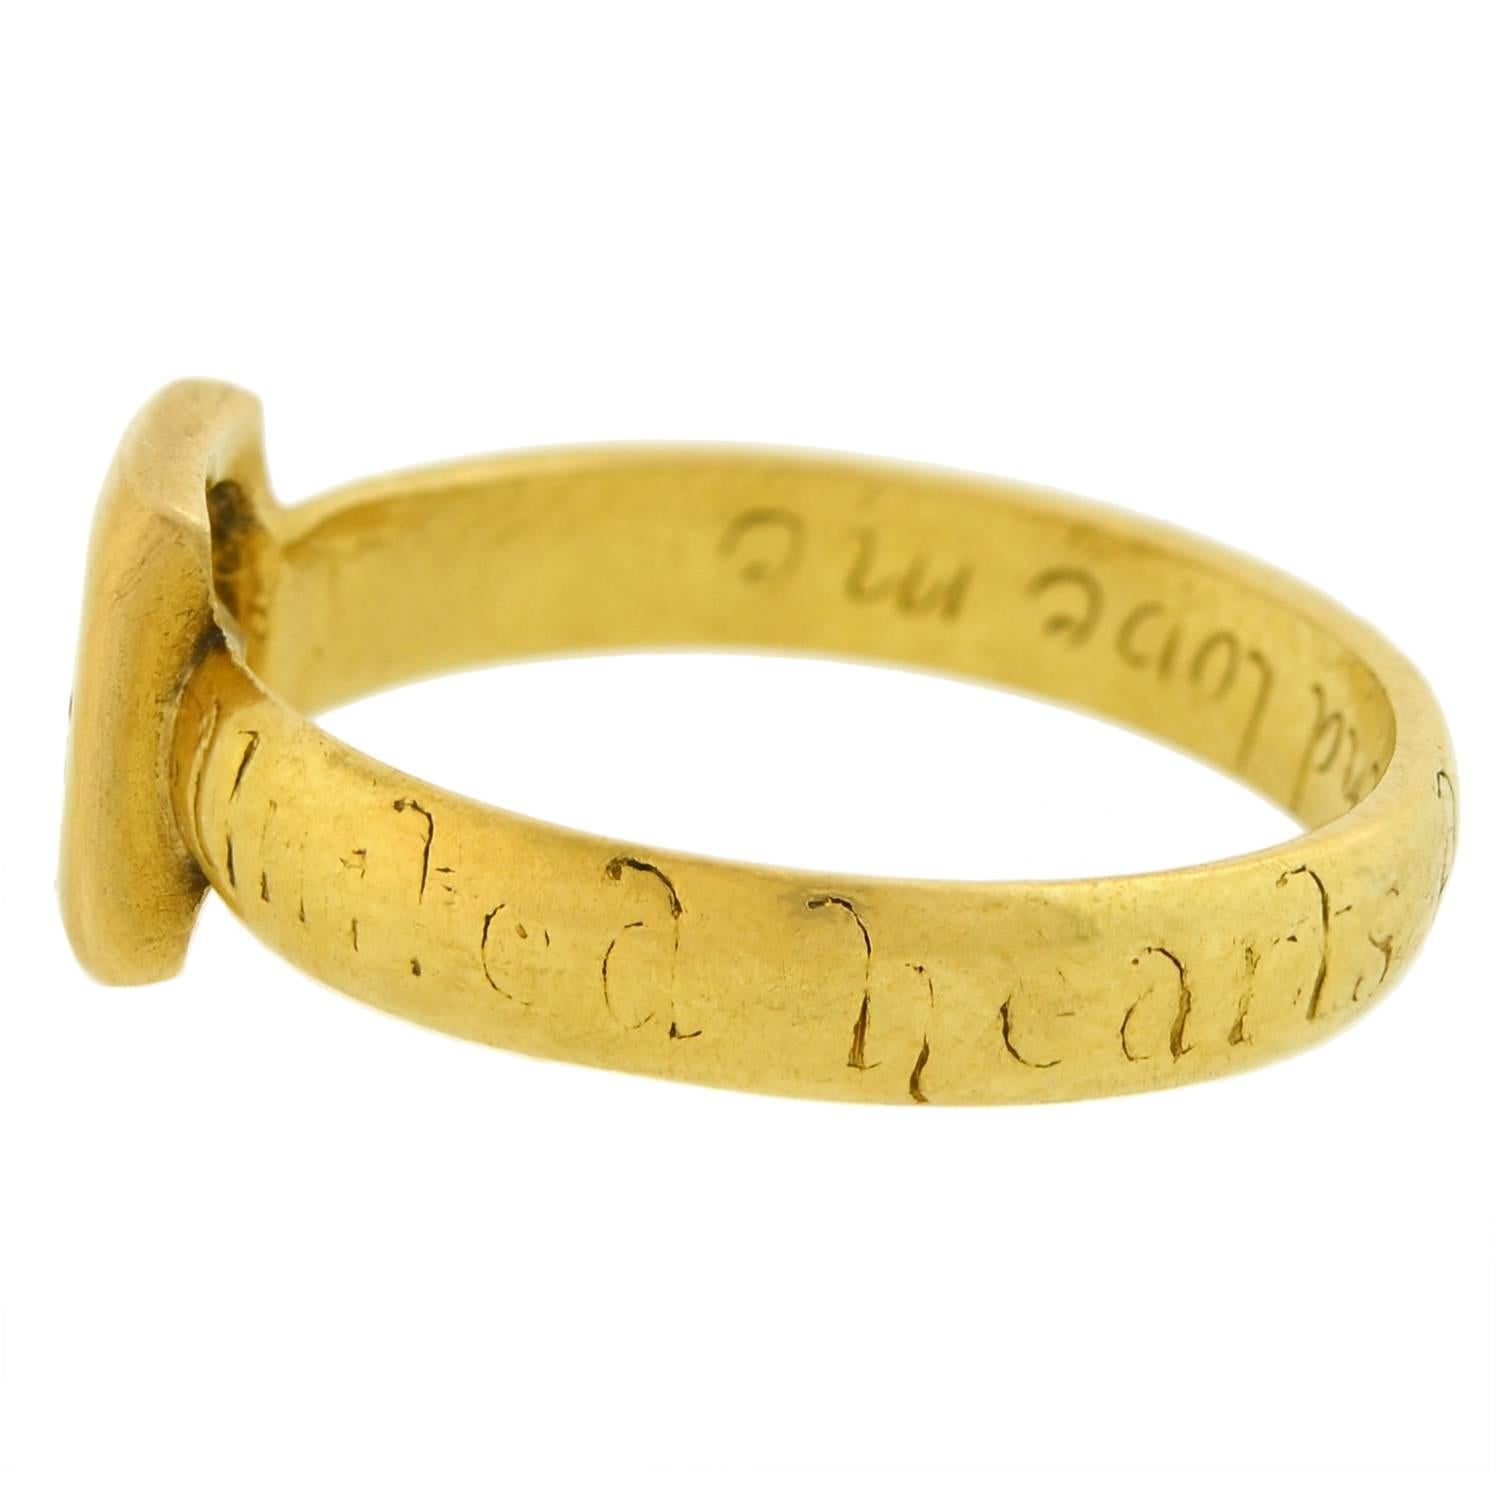 A very unusual and special diamond ring from the Georgian (ca1820) era! This rare single stone piece features a lovely and romantic design crafted in vibrant 18kt yellow gold. A sparkling old Tablet Cut diamond rests at the center, held within a